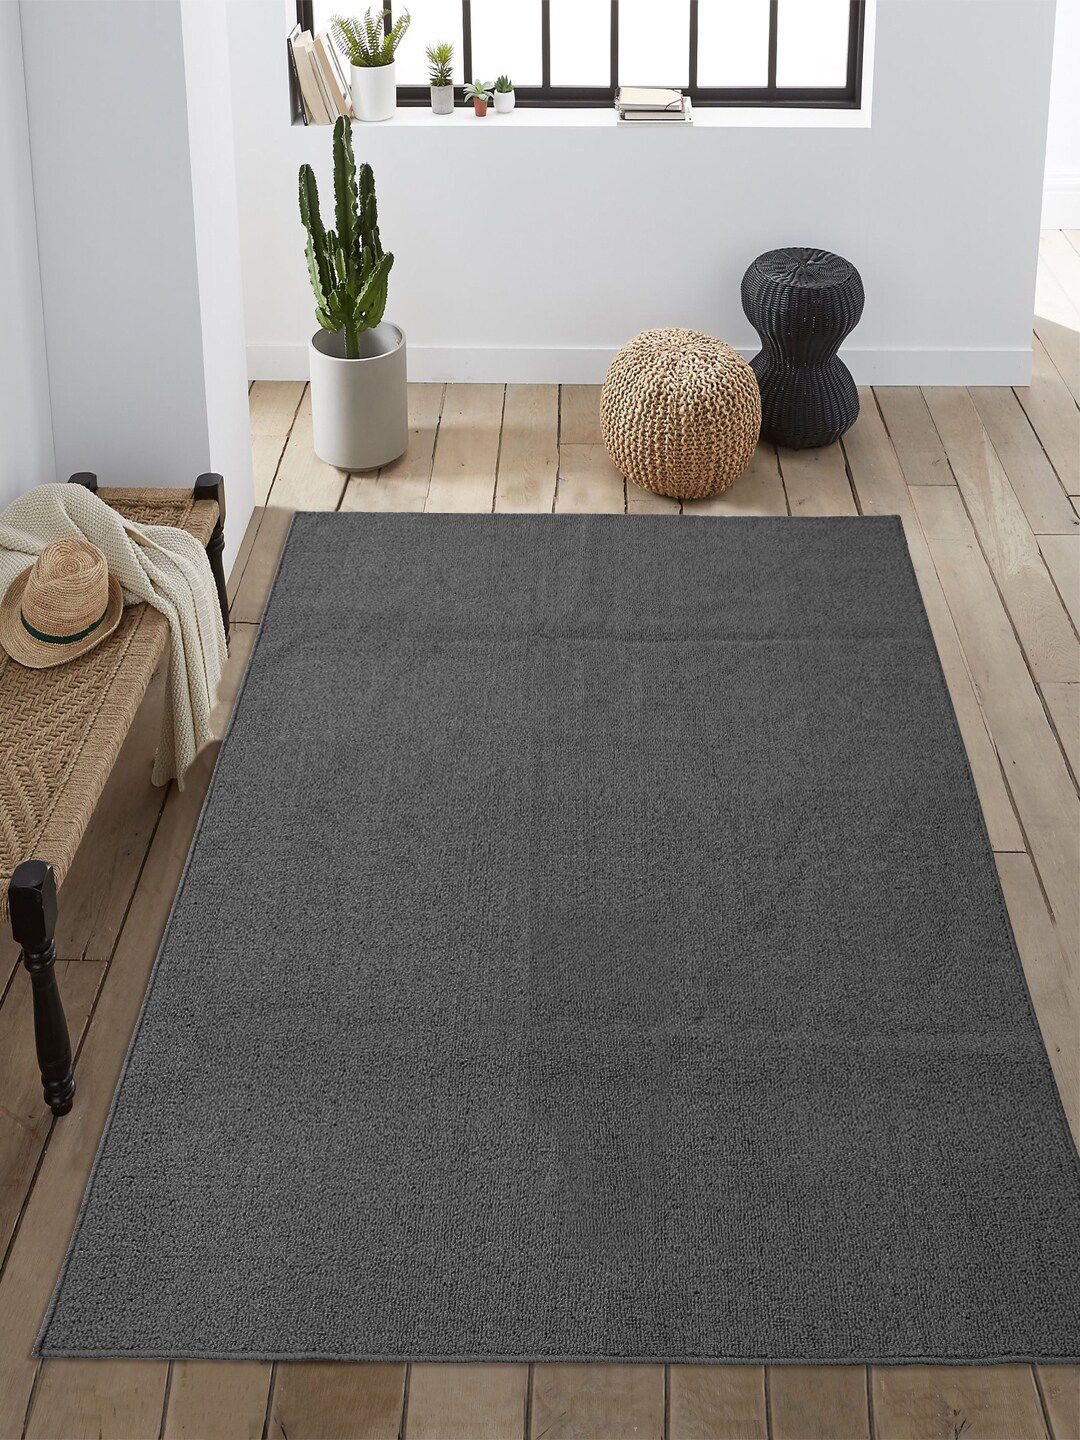 Saral Home Charcoal Grey Solid Anti-Skid Carpet Price in India